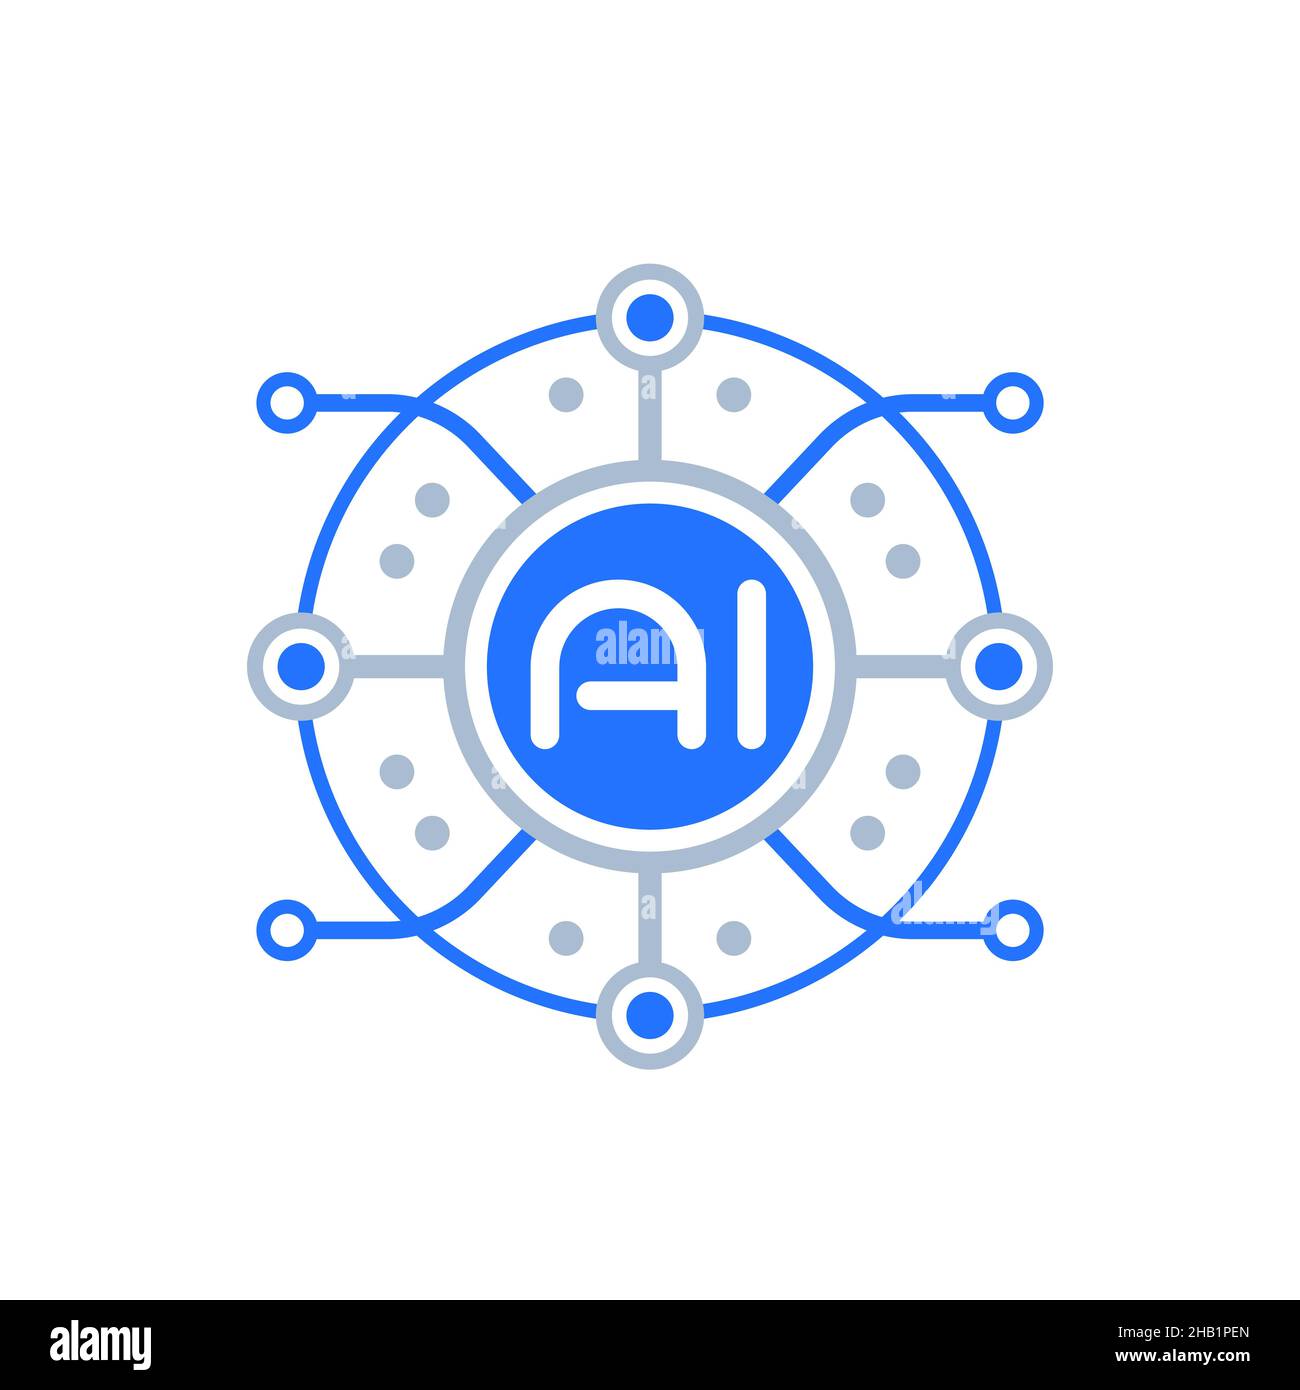 ai icon, artificial intelligence technology Stock Vector